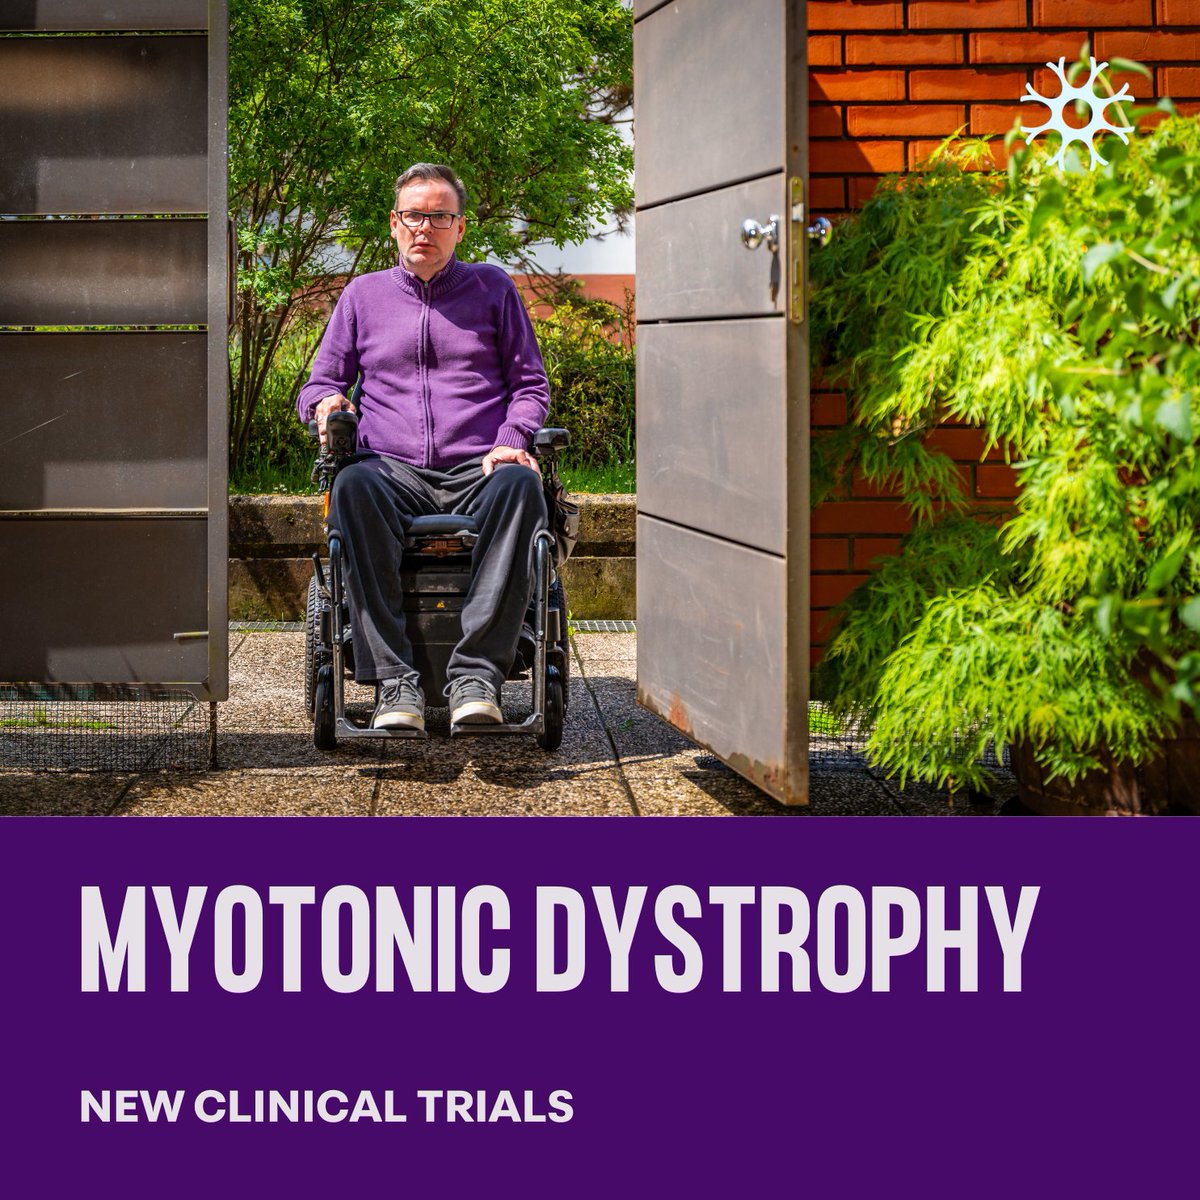 The Saguenay region of Quebec has the highest prevalence of #MyotonicDystrophy in the world (1 in 400). Several new #clinicaltrials on #DM1 at the CRU are testing #ASO-based therapies that, if successful, would offer the first disease modifying treatment. cru.mcgill.ca/nm